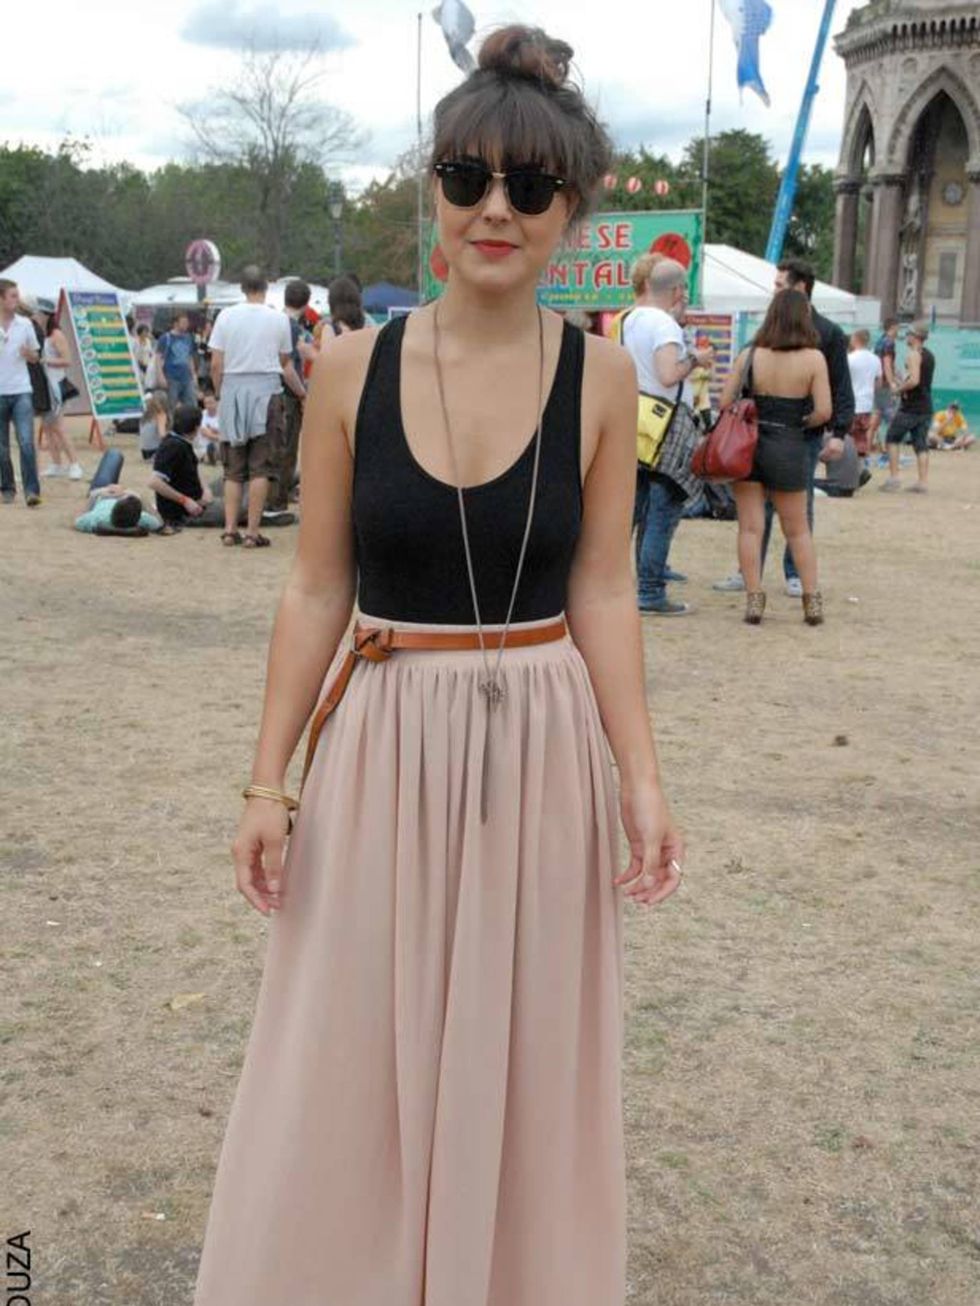 <p>Hollie, 24, Store Manager. American Apparel skirt and top, boyfriend's belt, H&amp;M necklace, Topshop shoes, Ray Ban sunglasses. </p>